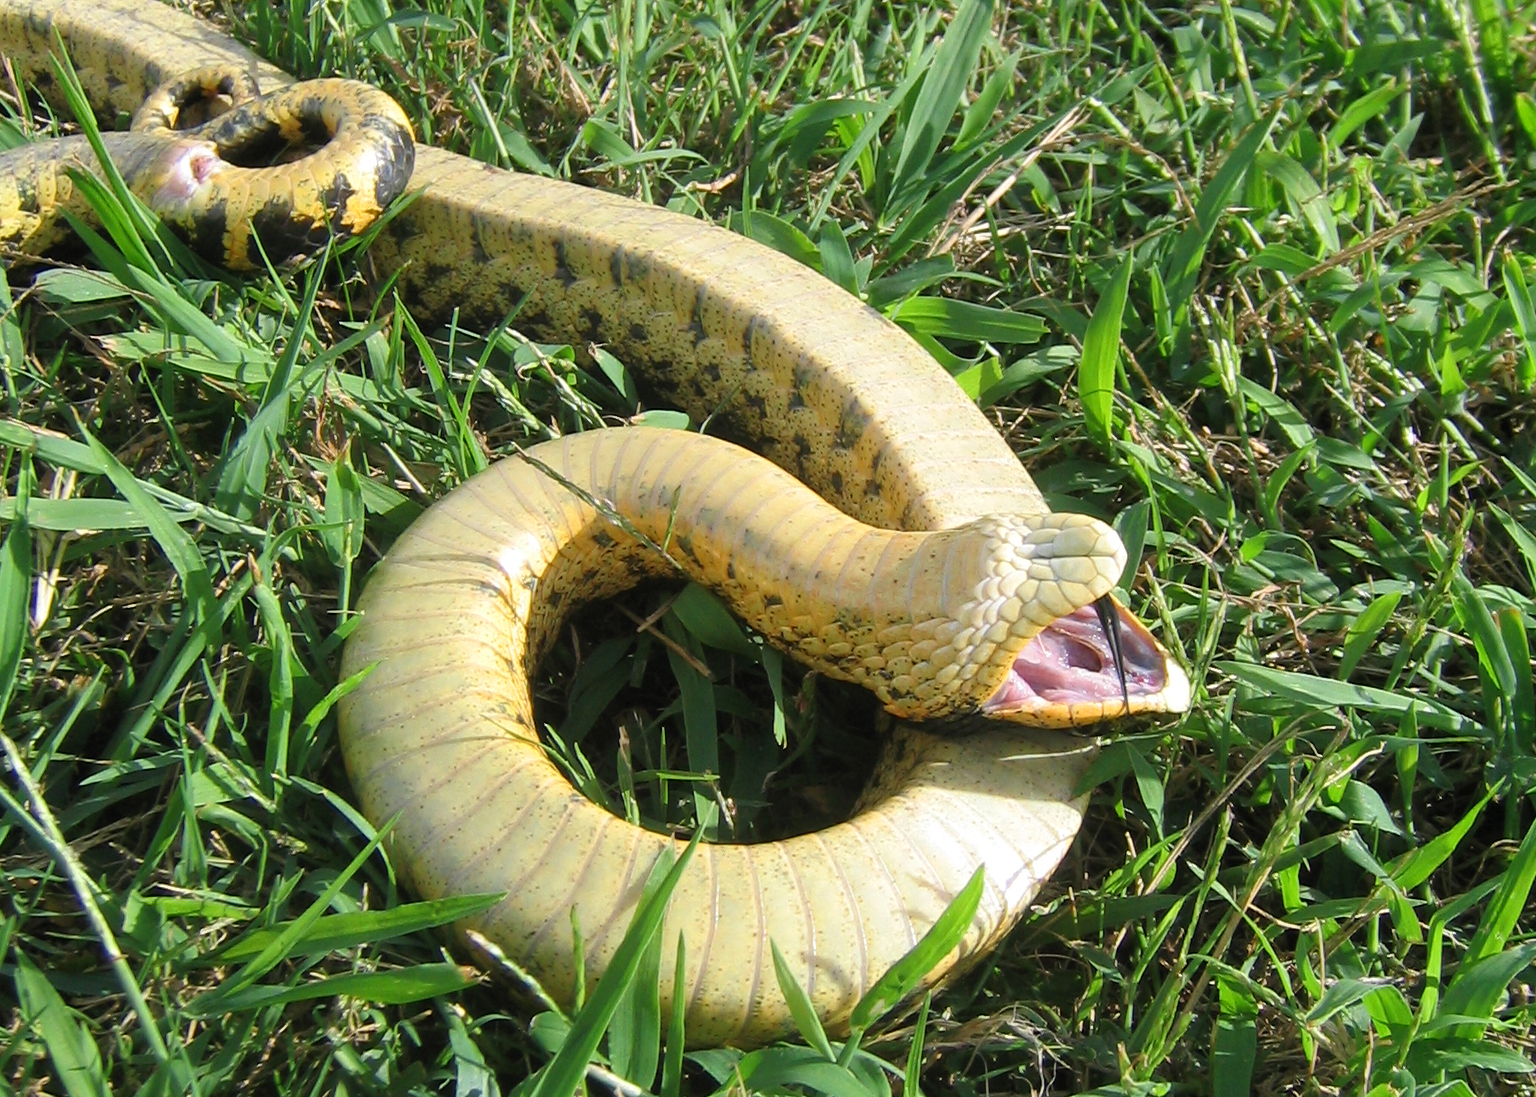 Watch The Hognose Snake Play Dead To Deceive Predators How It Works,Potty Training Crate Training A Puppy